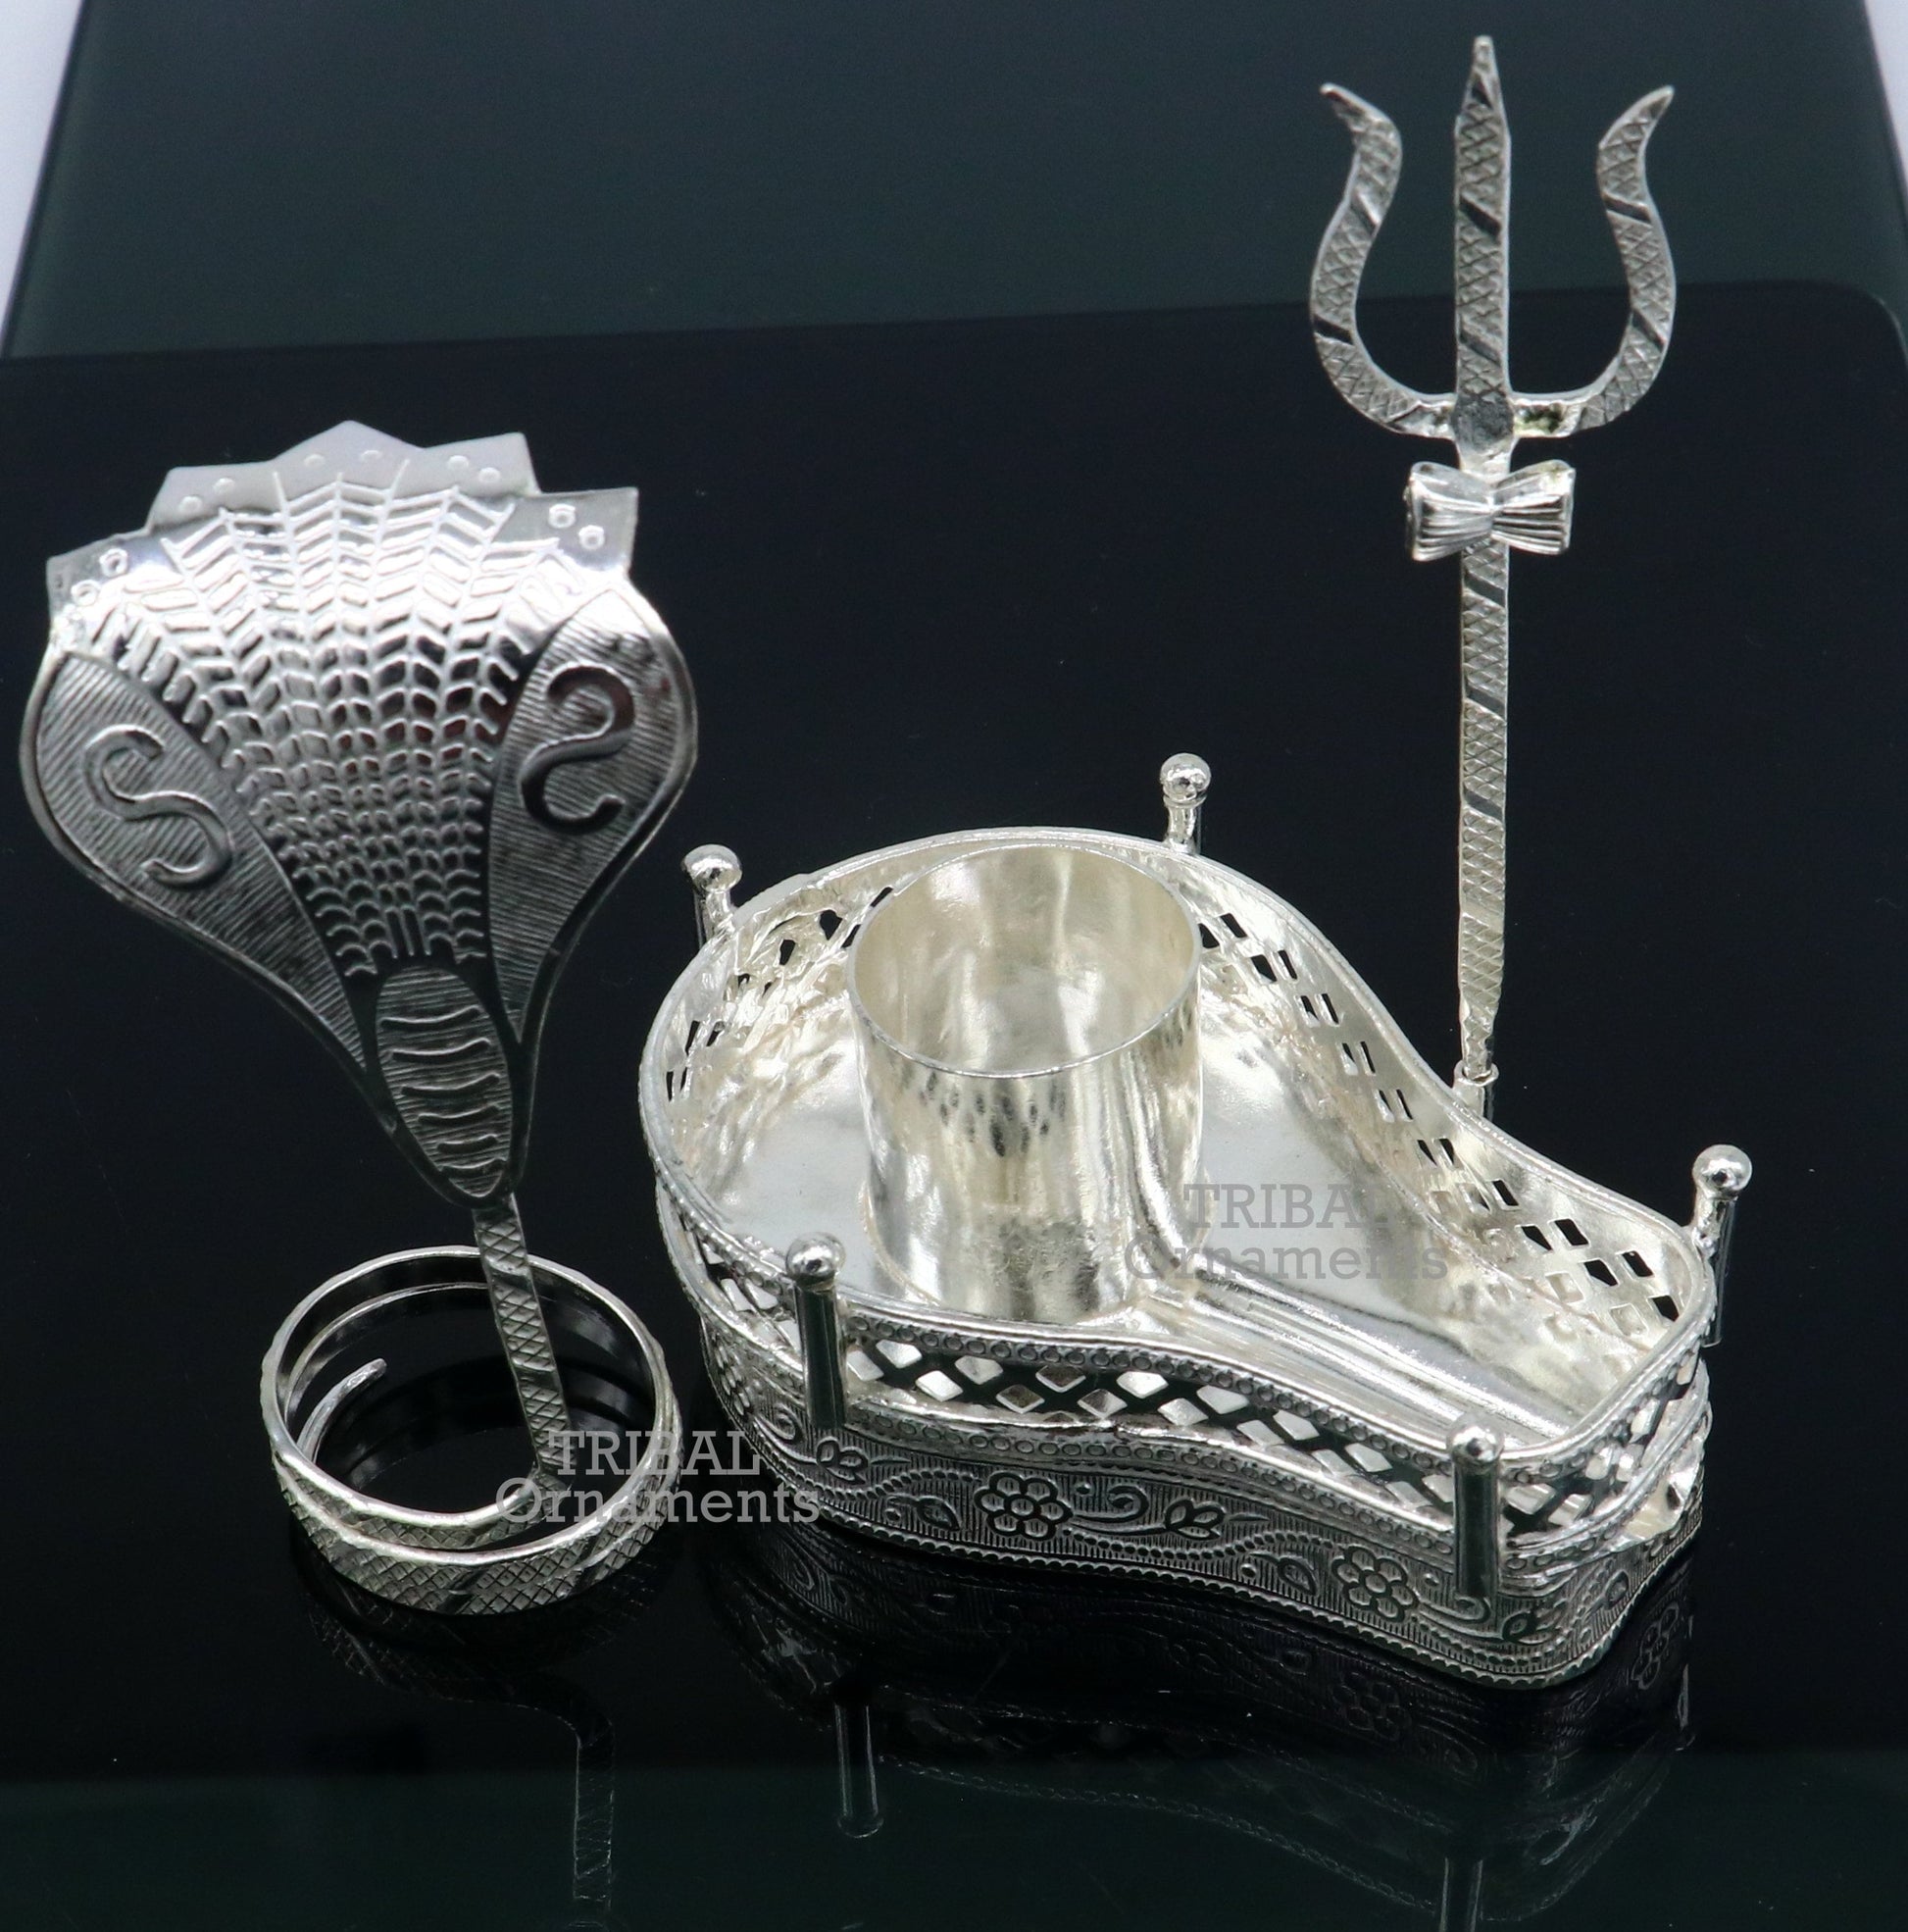 925 sterling silver handmade lord shiva lingam stand/ jalheri with panchmukhi snake (5 face snake) and trident mahakal lingam stand su787 - TRIBAL ORNAMENTS